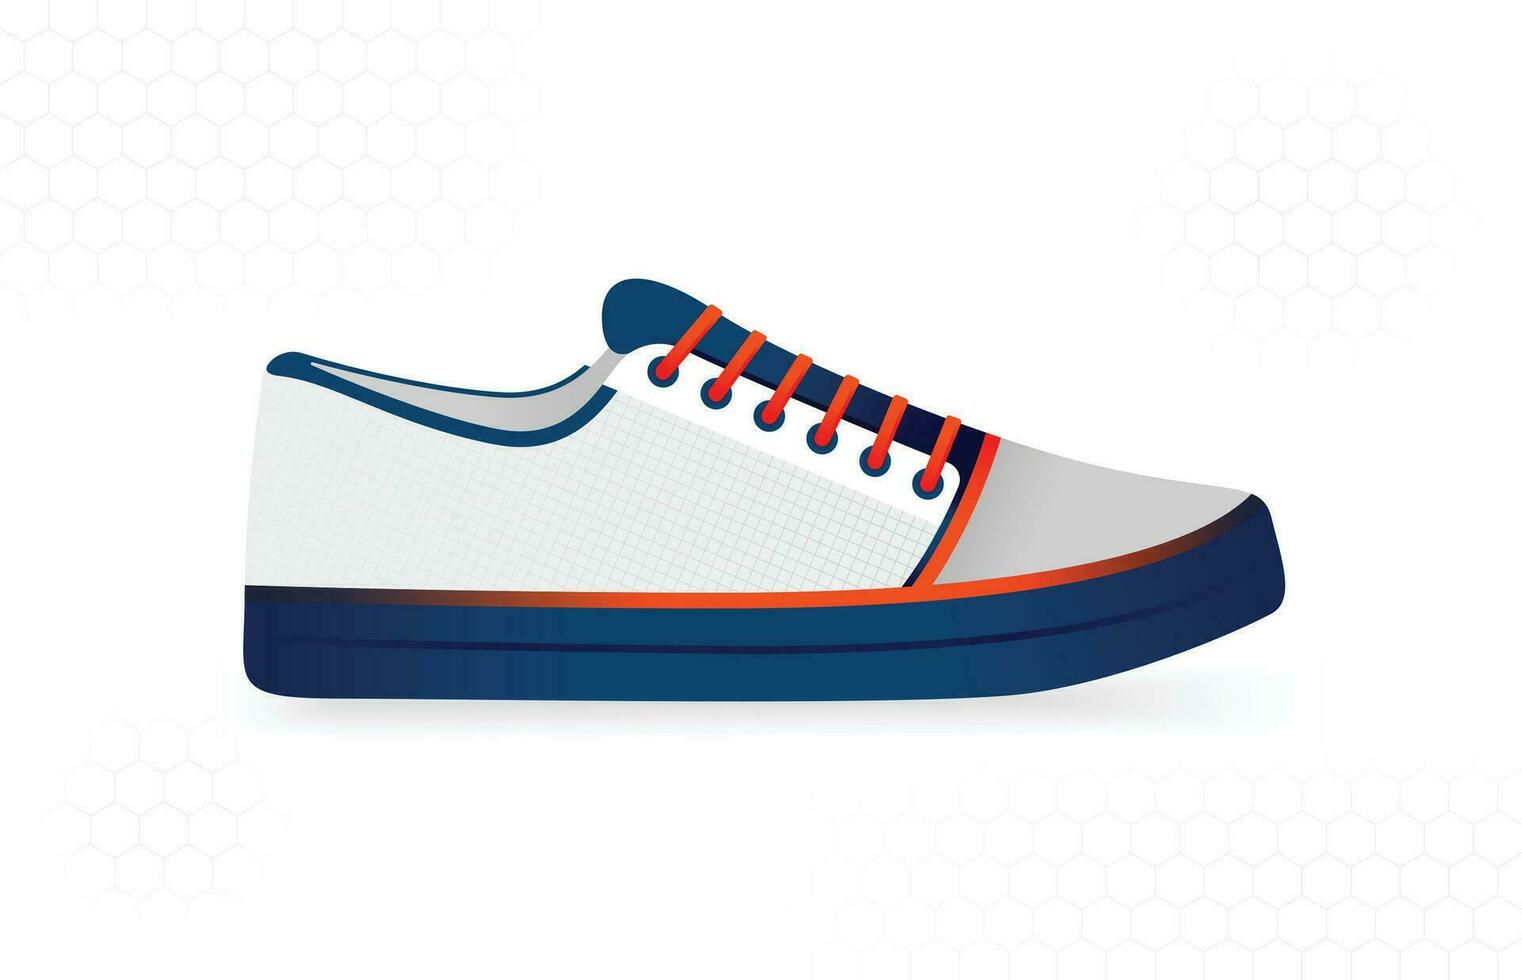 white sneaker design with thick soles and orange shoelaces for casual use, work, sports, school, running. vector